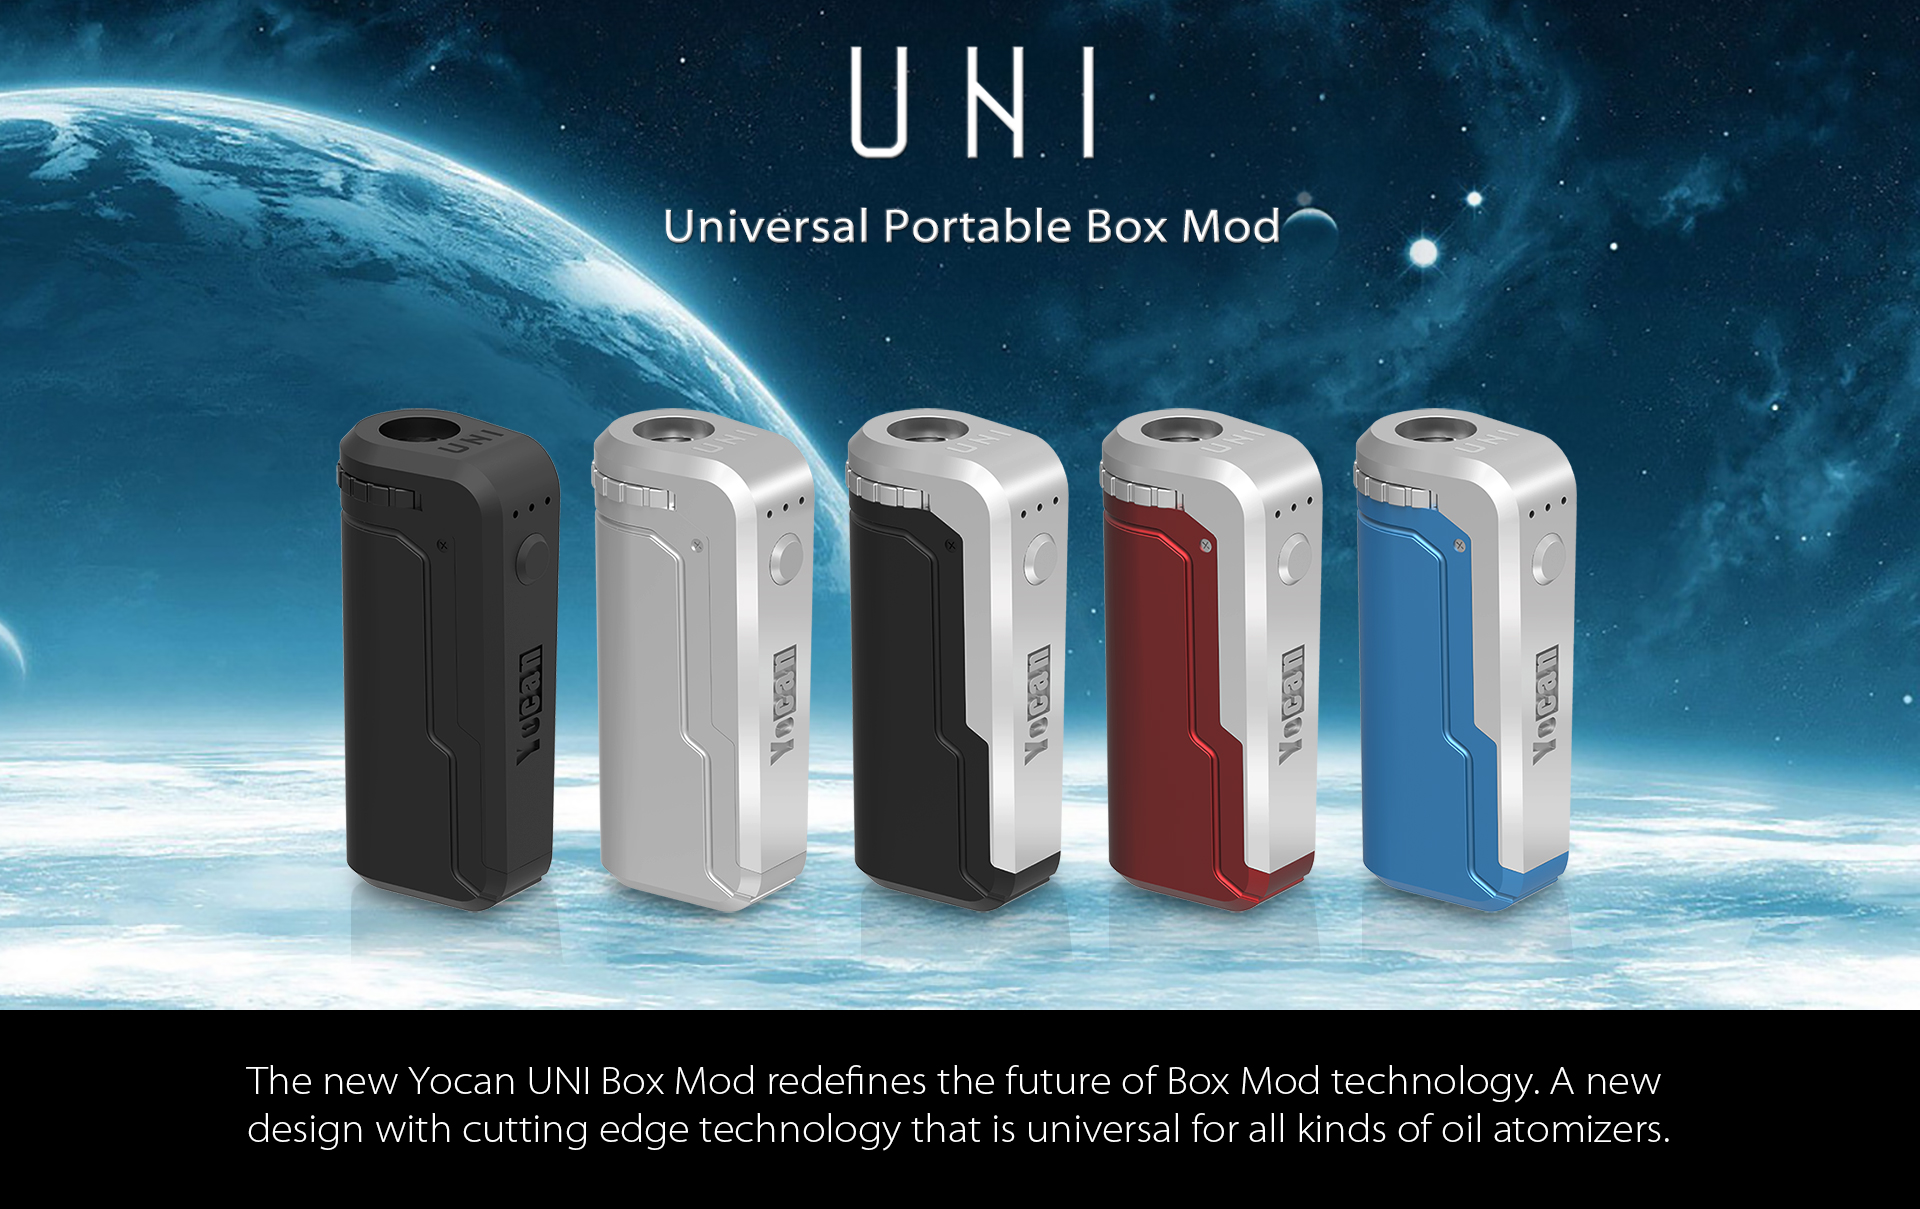 Yocan UNI redefines the future of box mod technology.